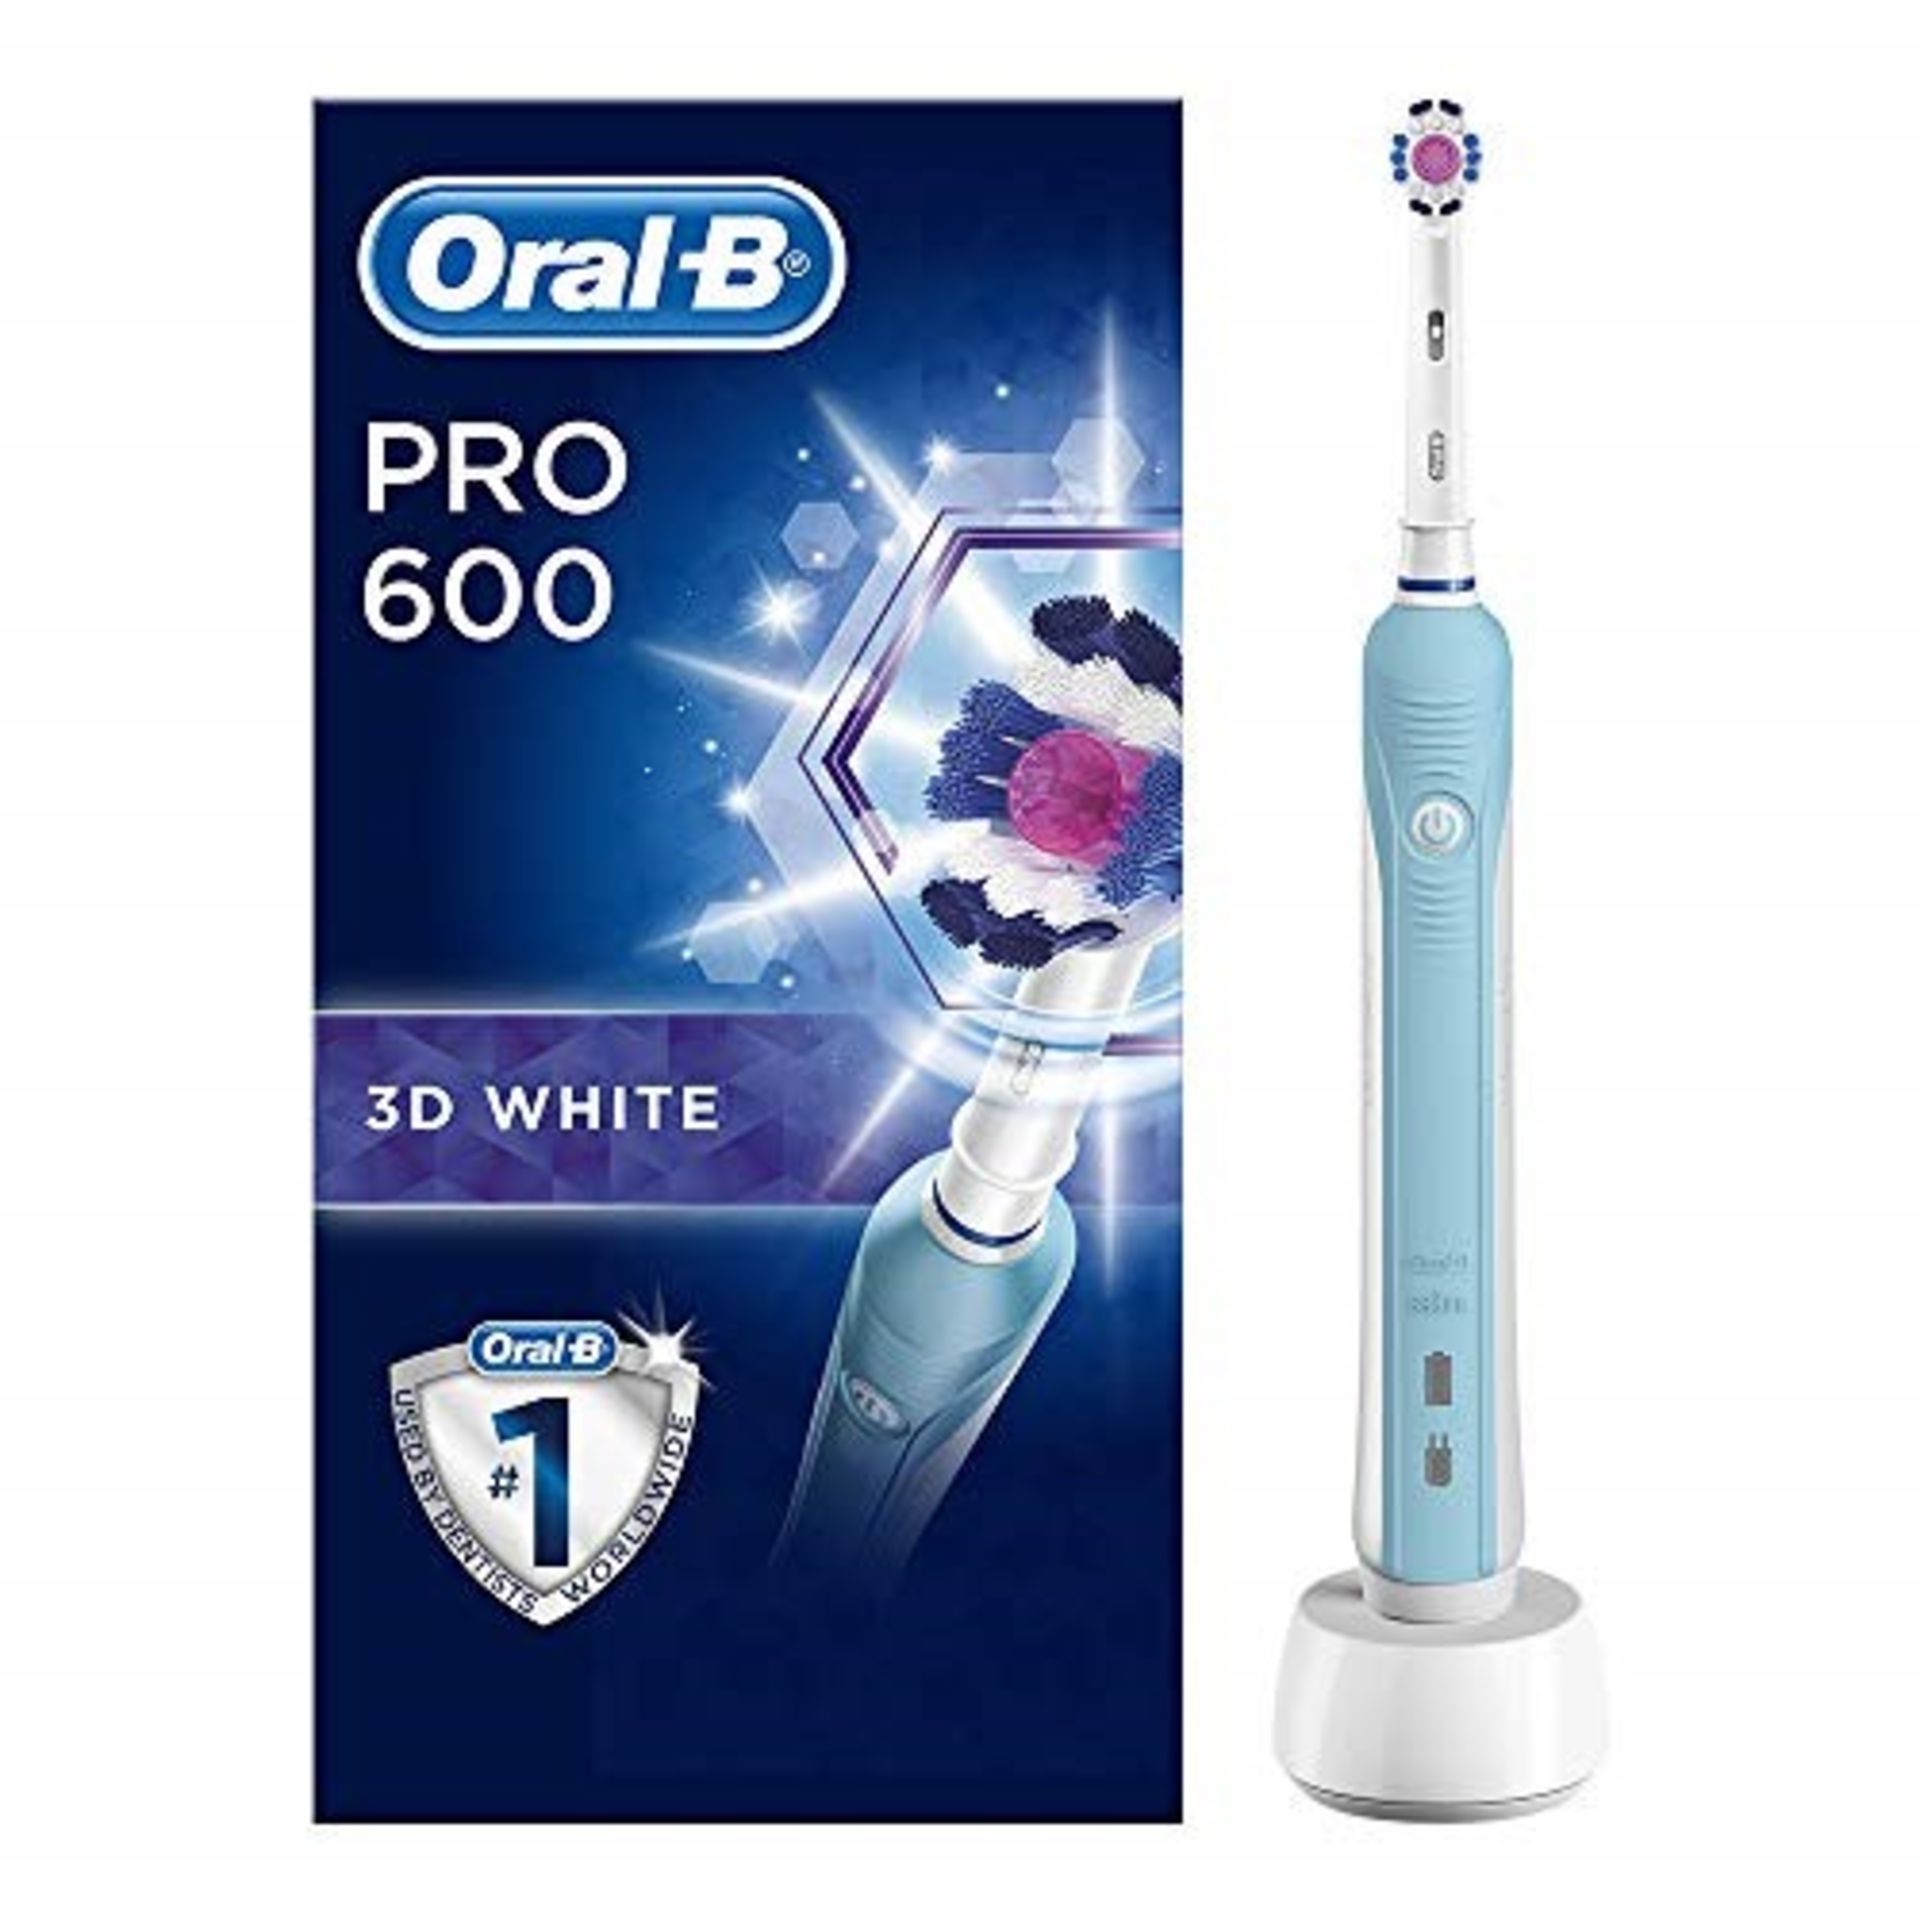 Oral-B Pro 600 3D White Electric Rechargeable Toothbrush Powered by Braun, 1 Handle, 1